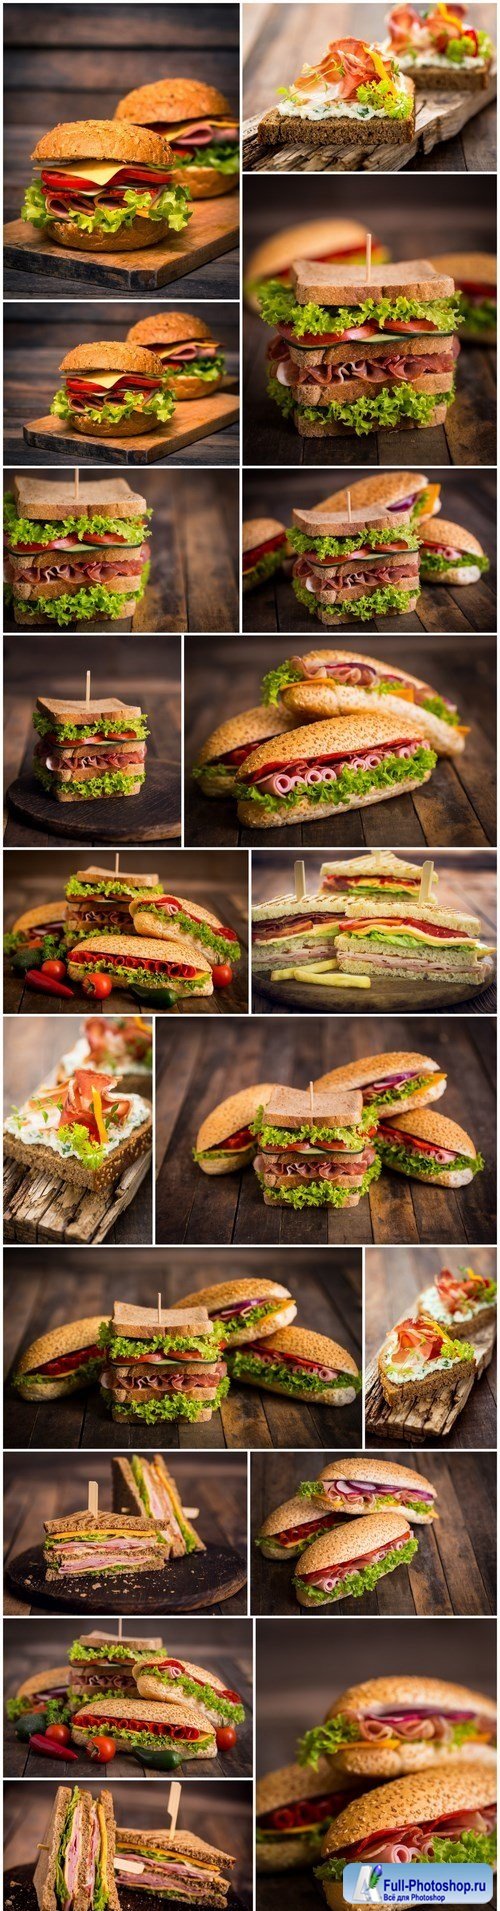 Tasty Sandwiches 10 - Set of 22xUHQ JPEG Professional Stock Images